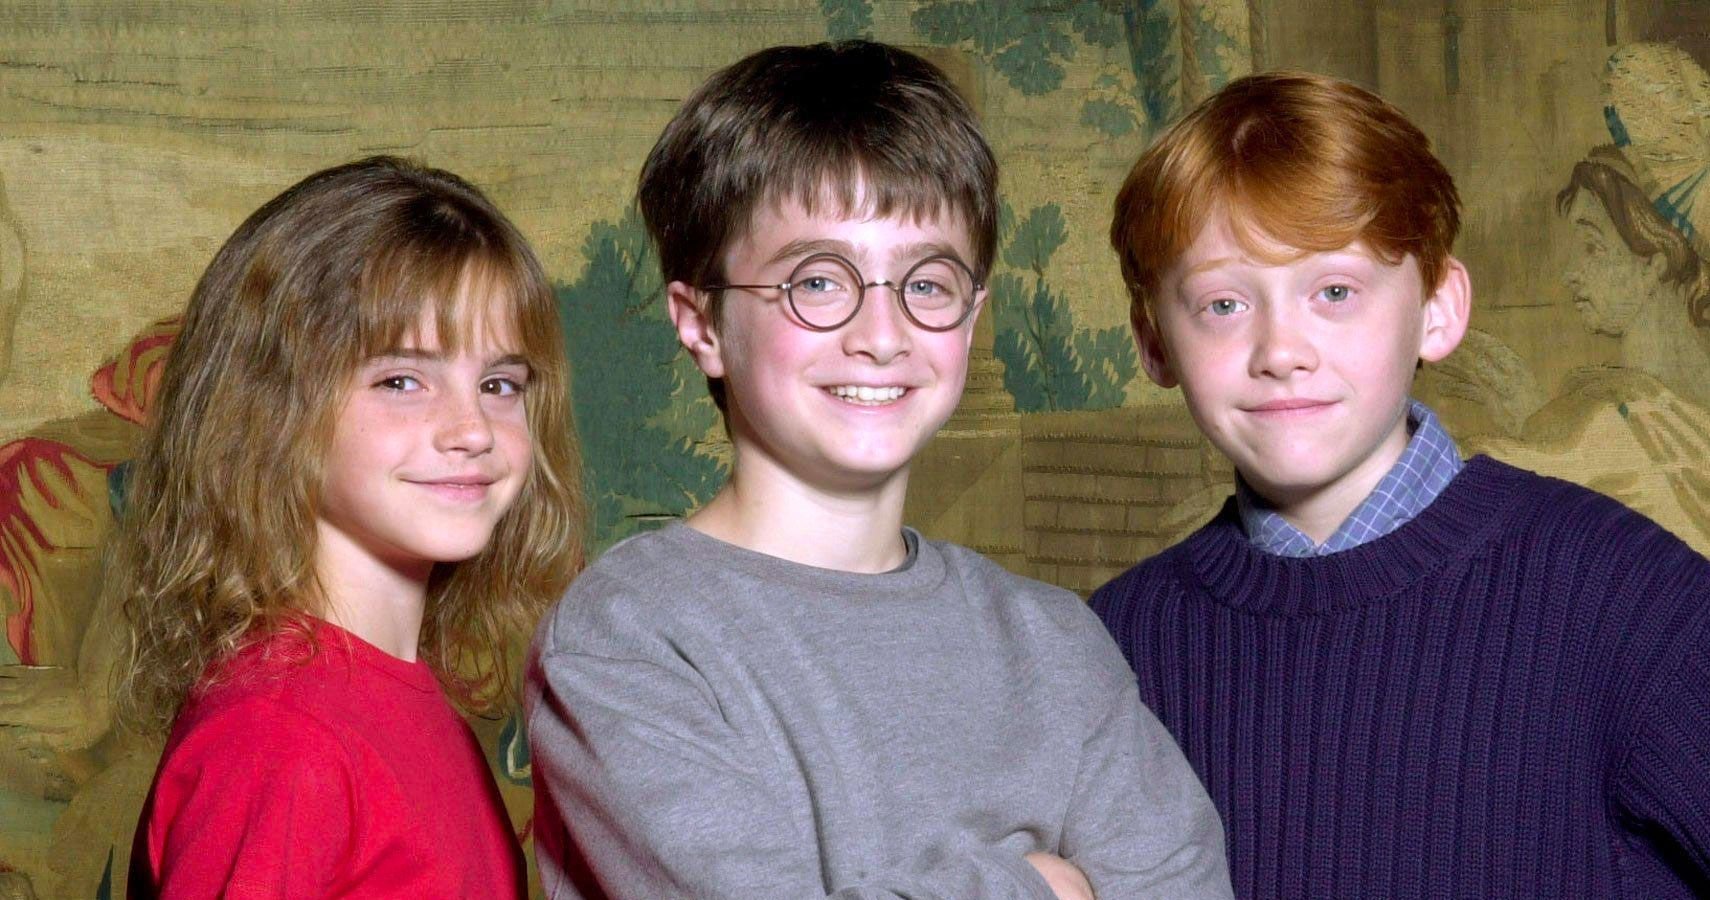 Here's What The Child Actors In Harry Potter Had To Go Through